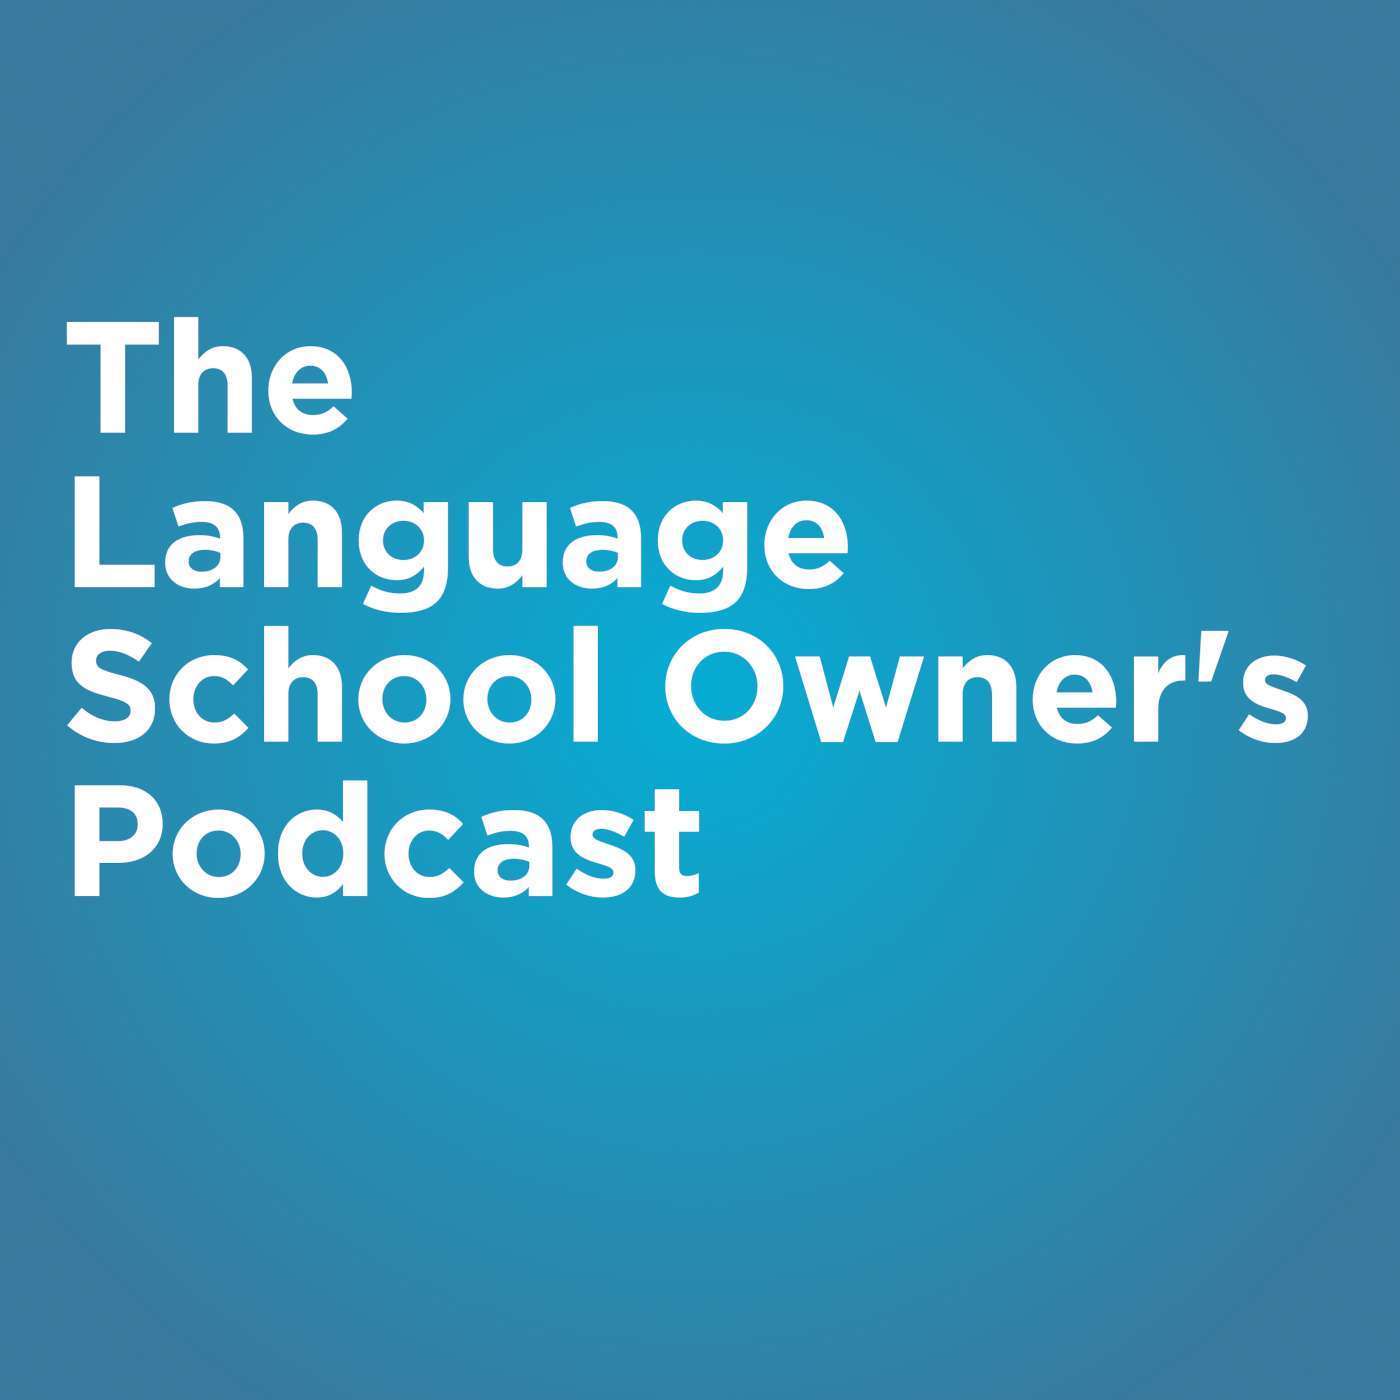 The Language School Owner's Podcast